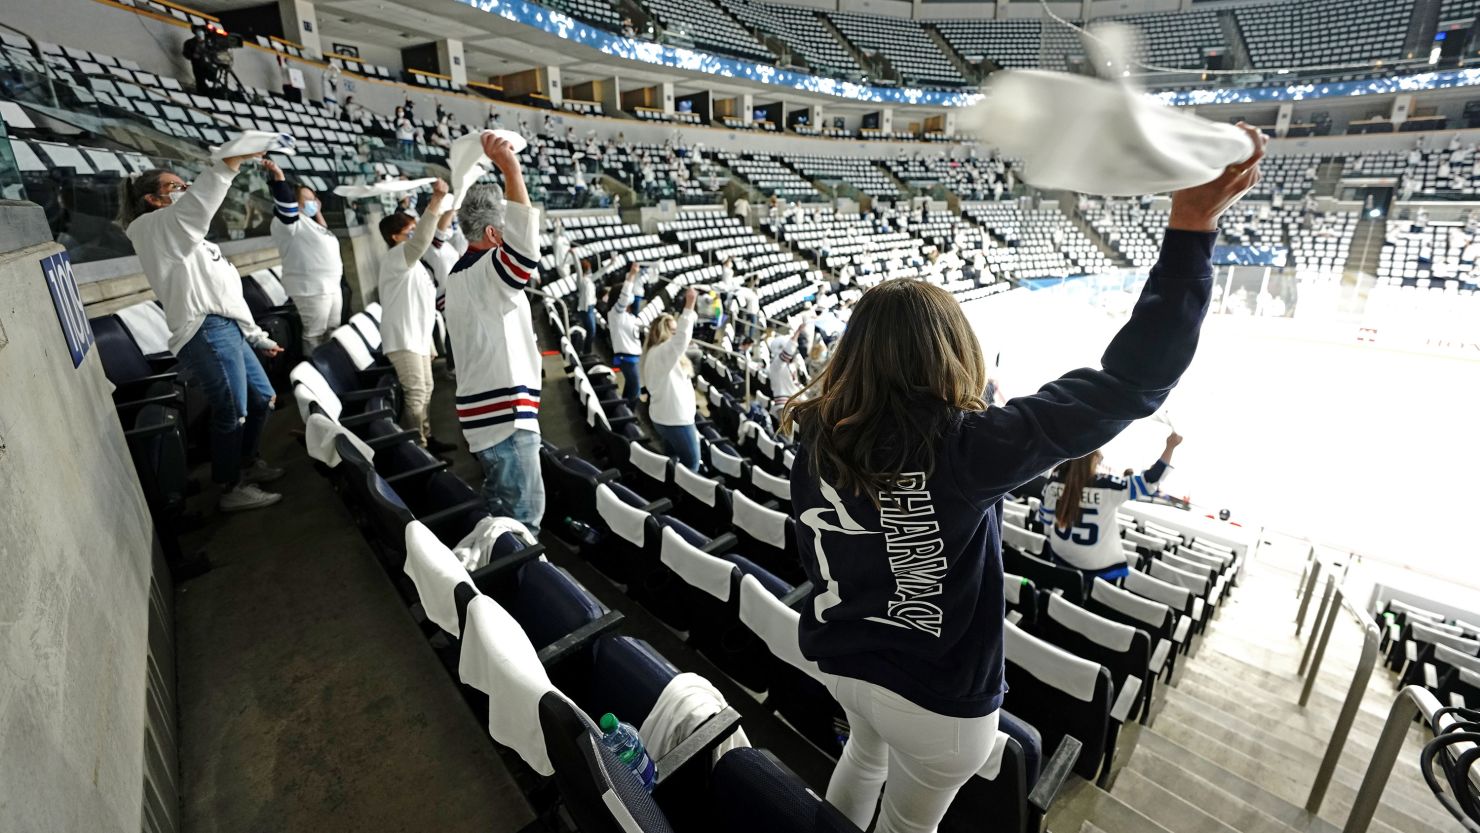 People watch the Winnipeg Jets play the Montreal Canadiens on June 2 in Winnipeg, Canada. Under Manitoba's new orders, professional sporting events can open to 100% capacity for vaccinated people